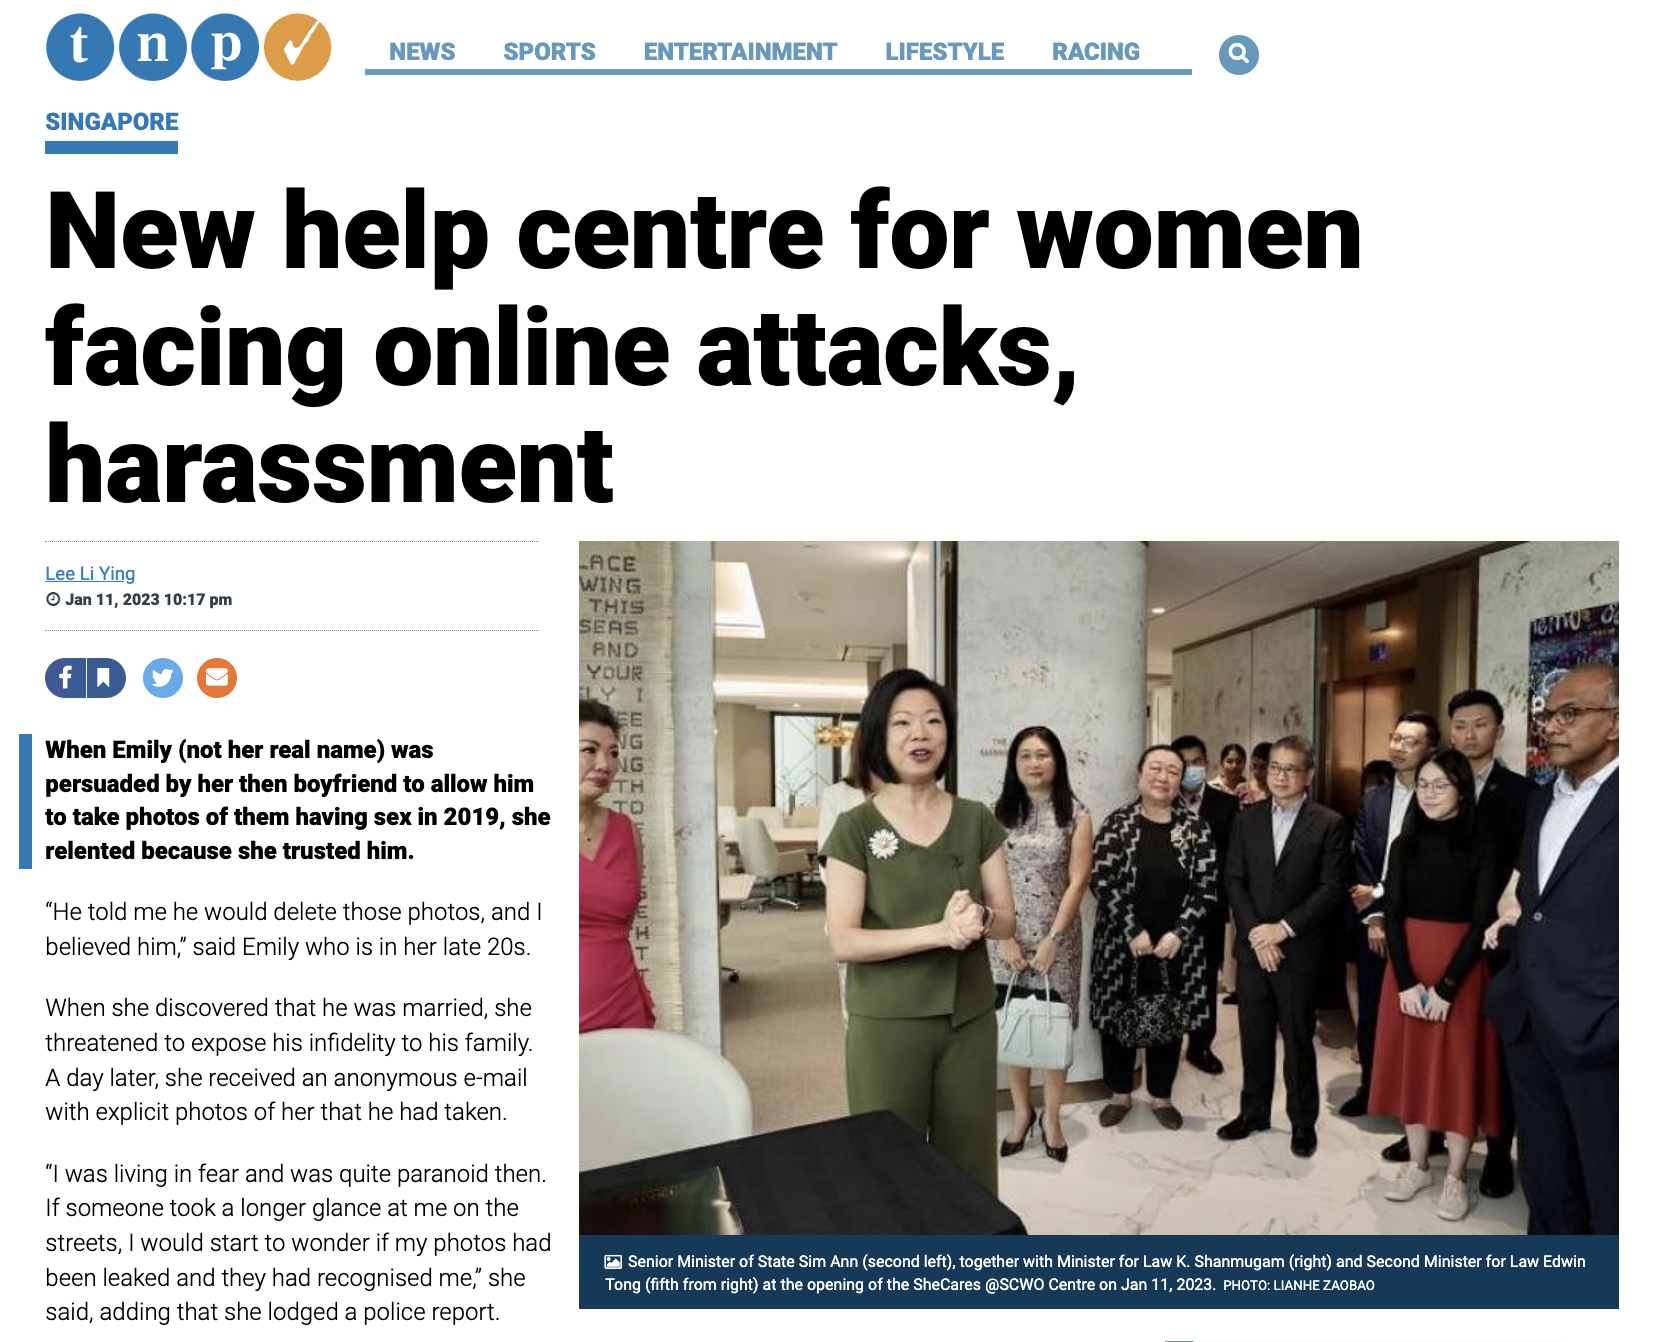 New help centre for women facing online attacks, harassment